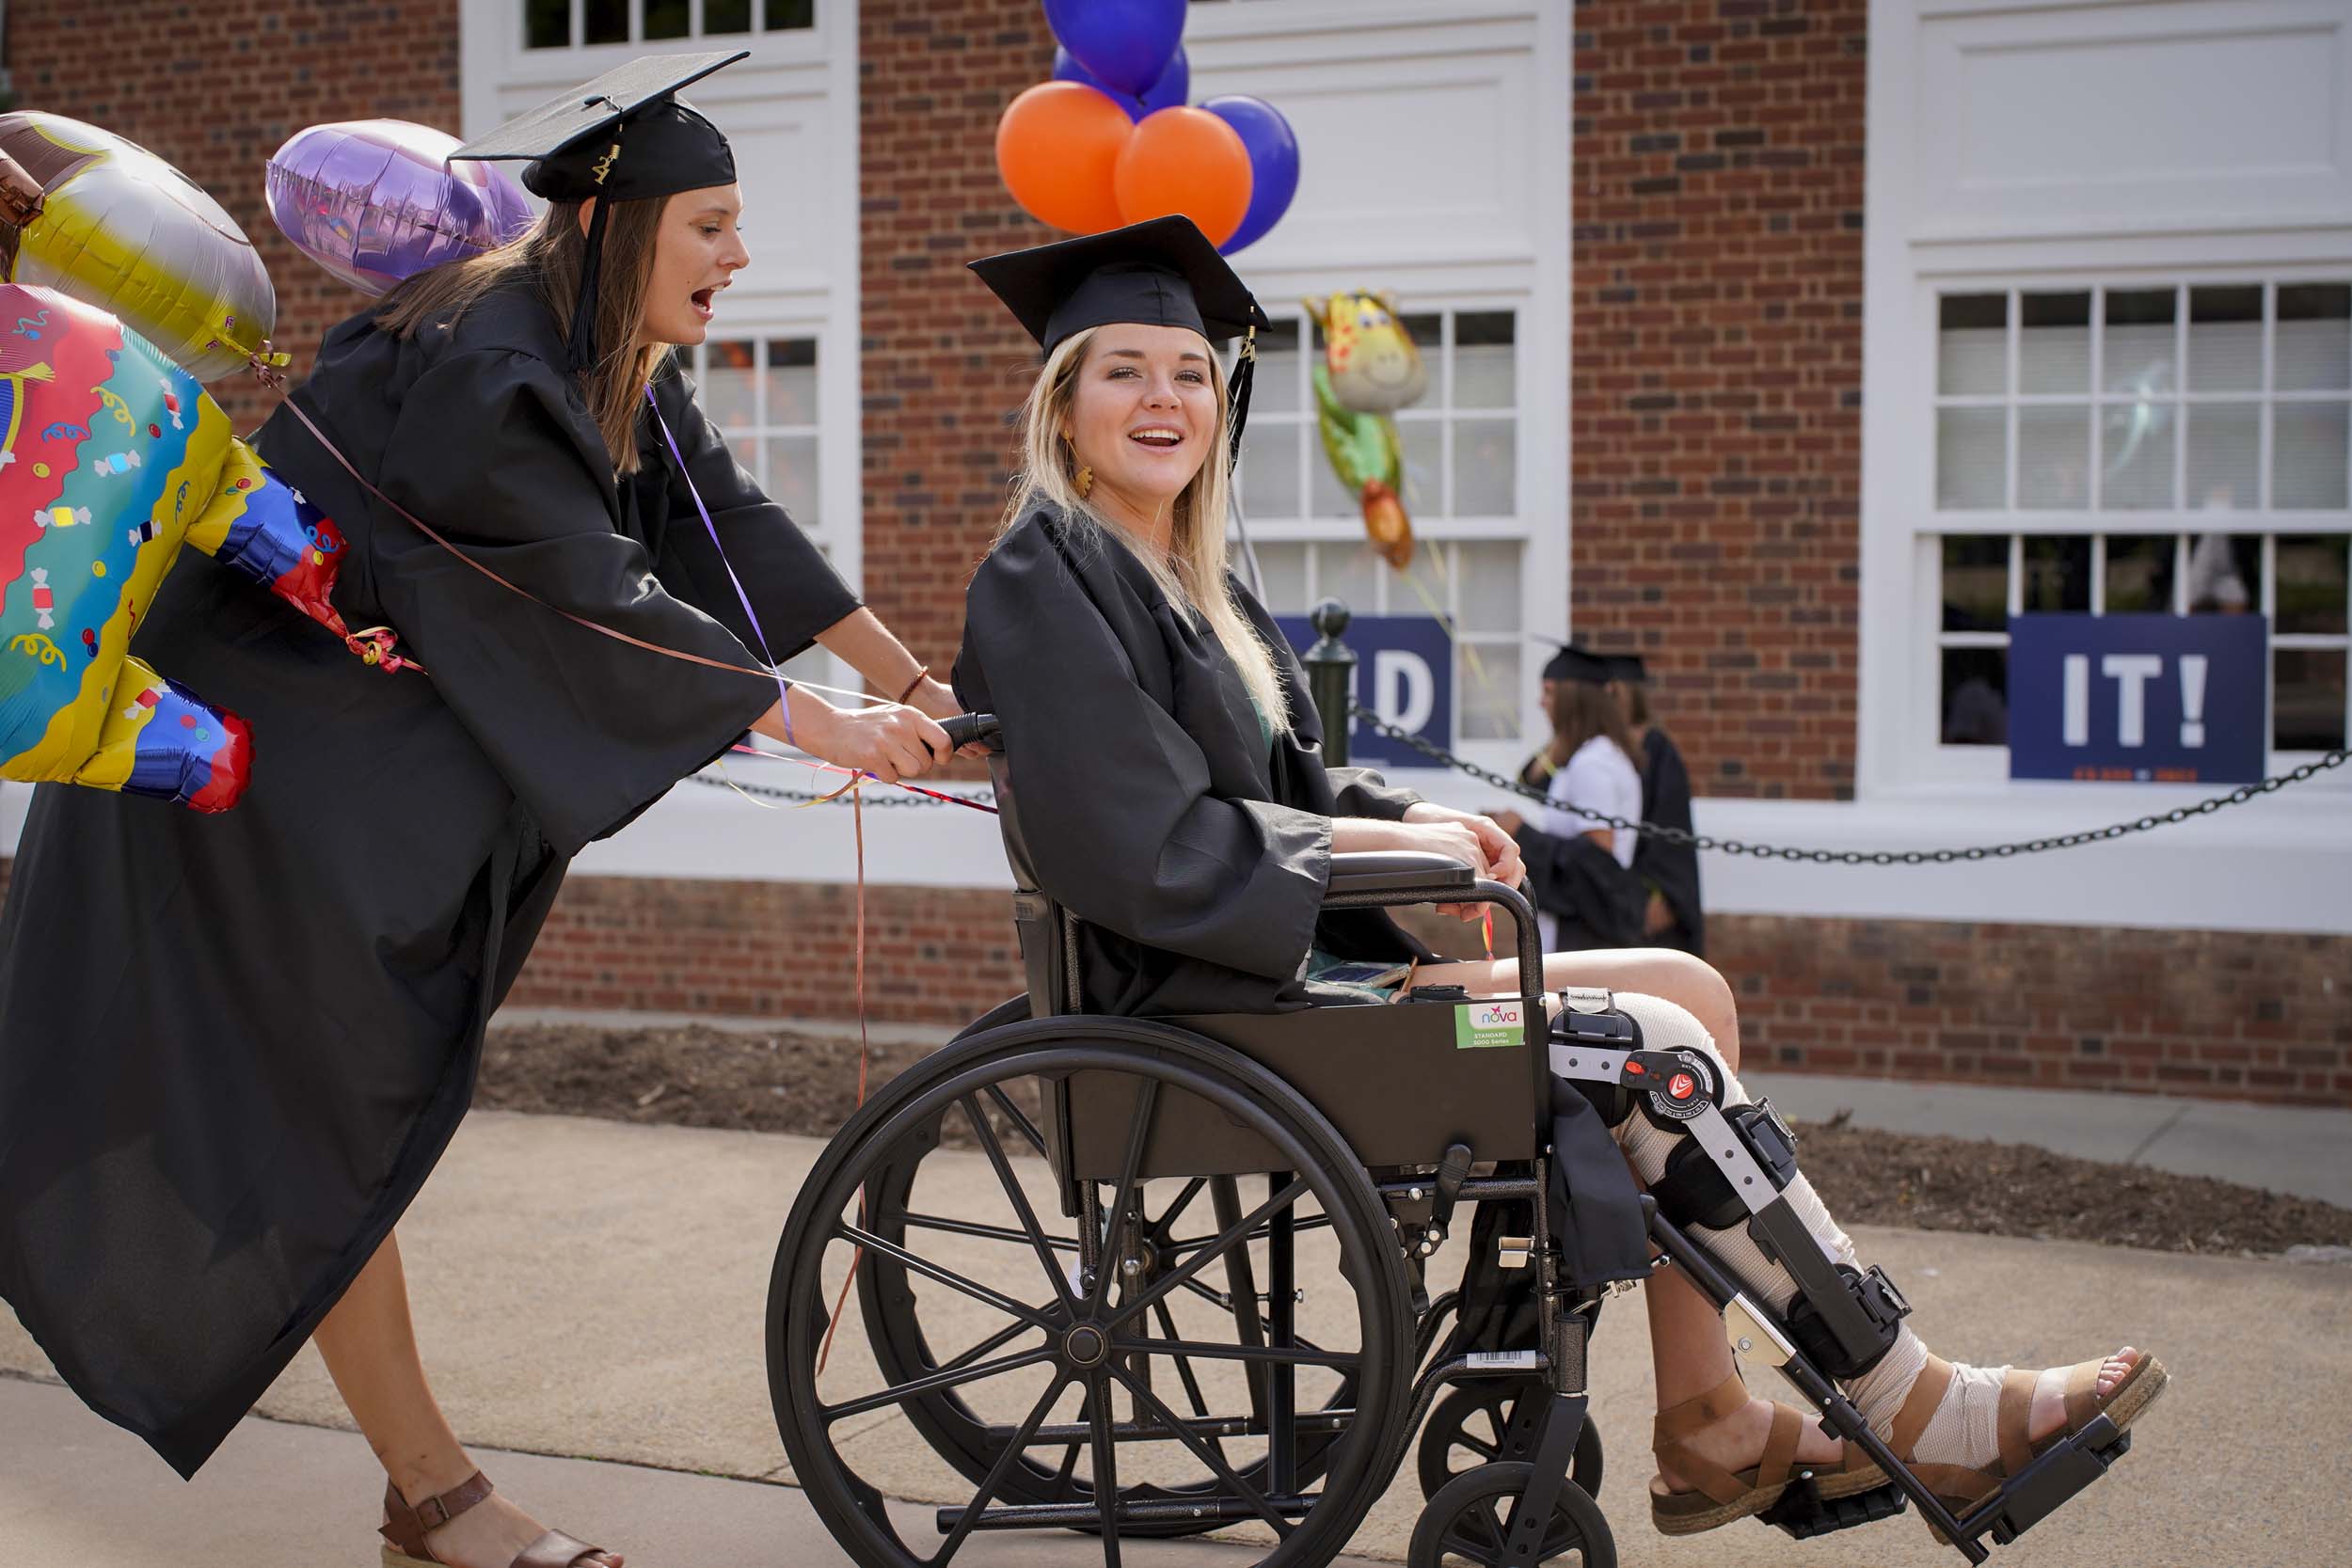 Graduate in a wheelchair being pushed by another graduate with balloons on the handles of the wheelchair